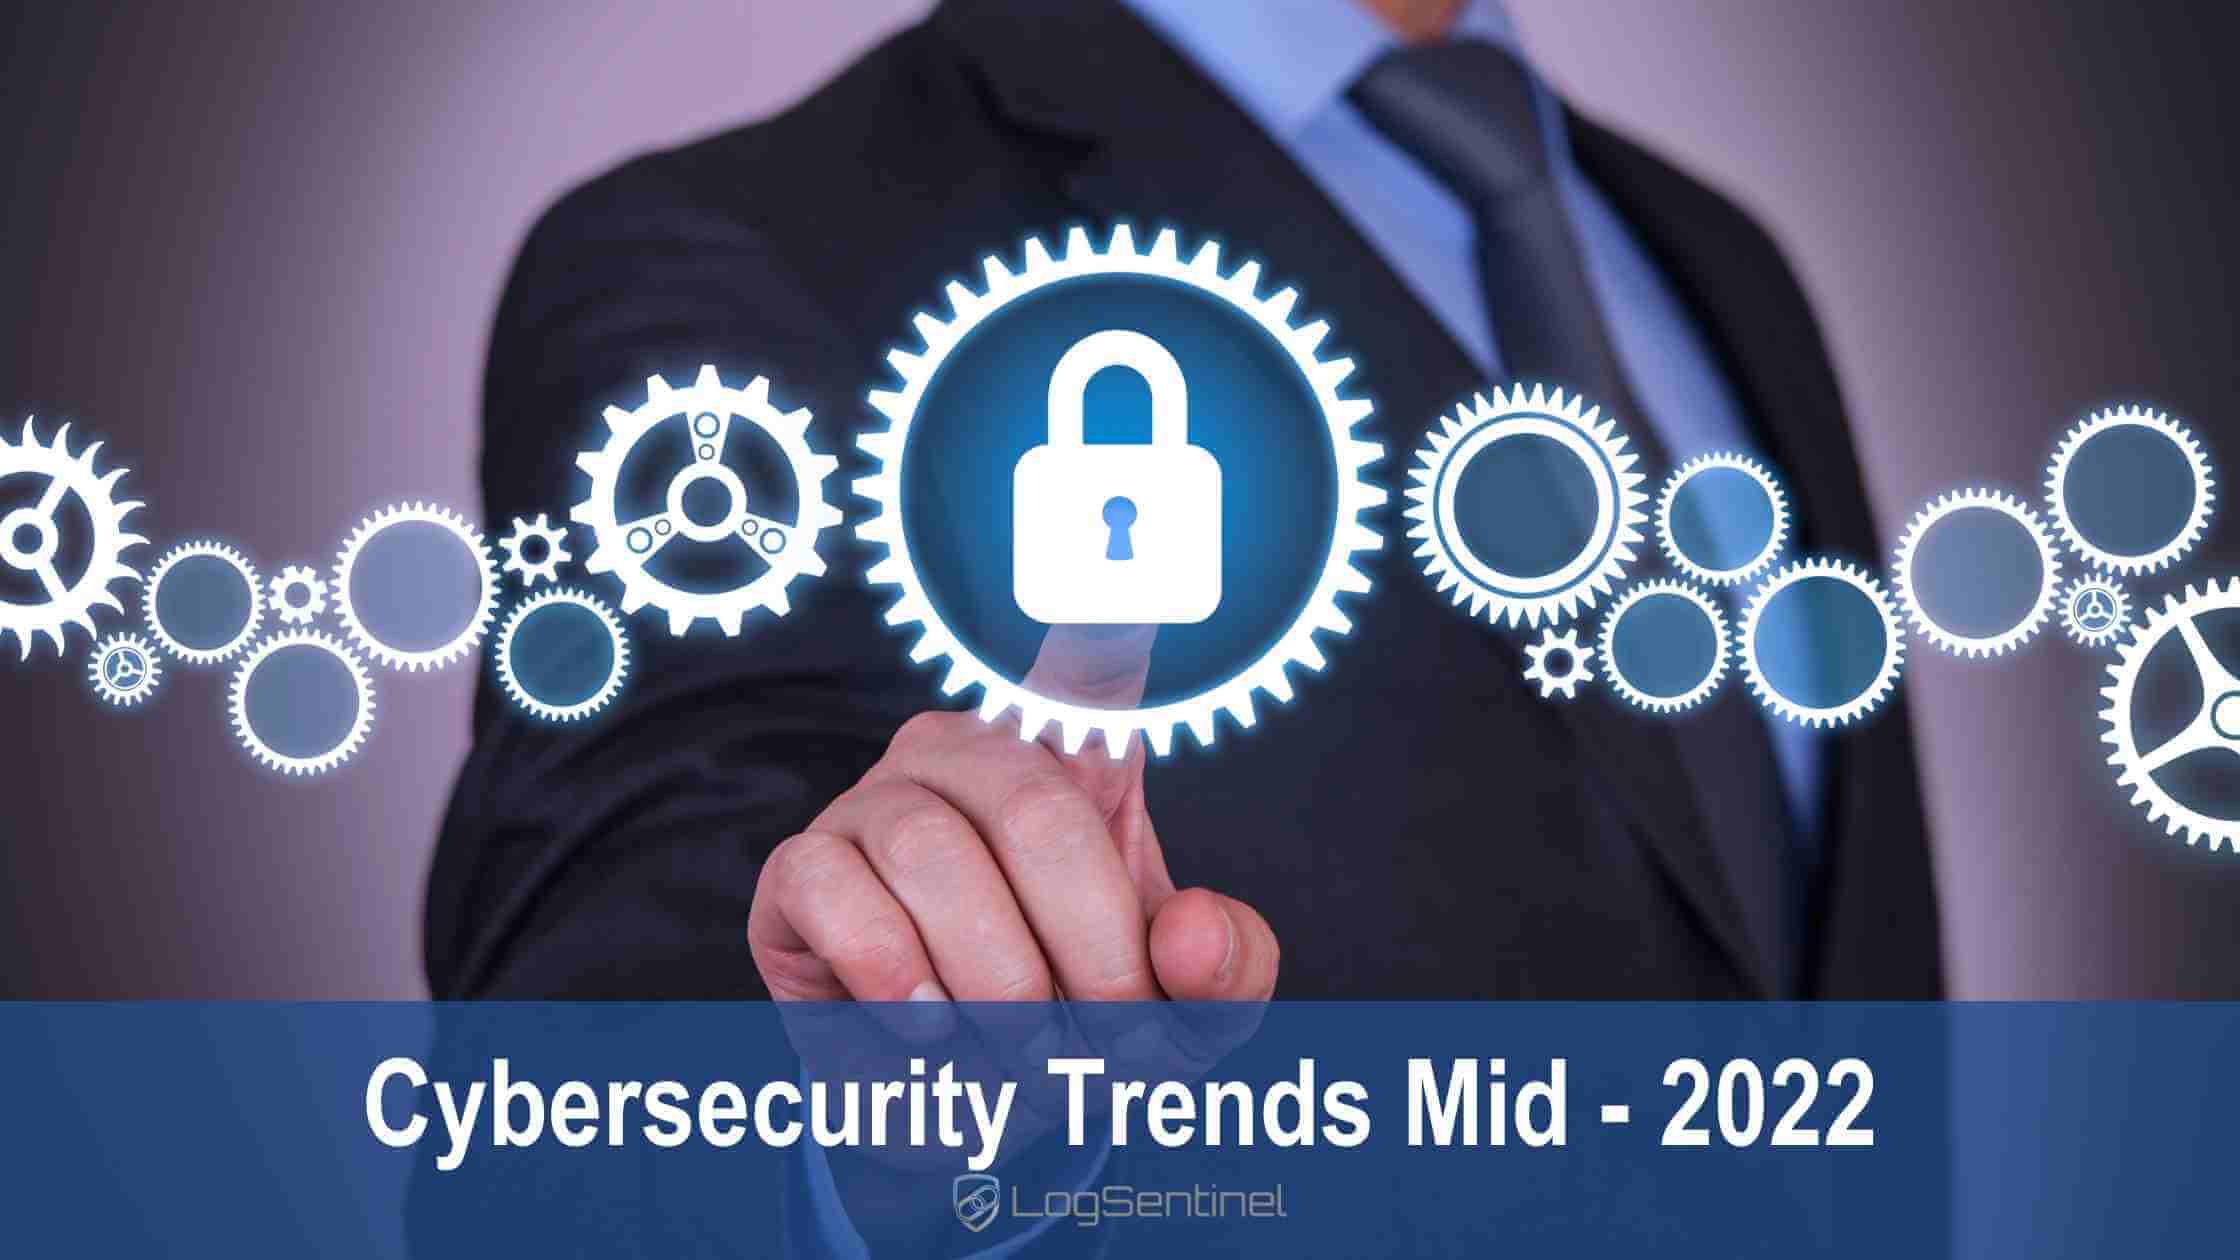 Cybersecurity-trends-mid2022-logsentinel (1)